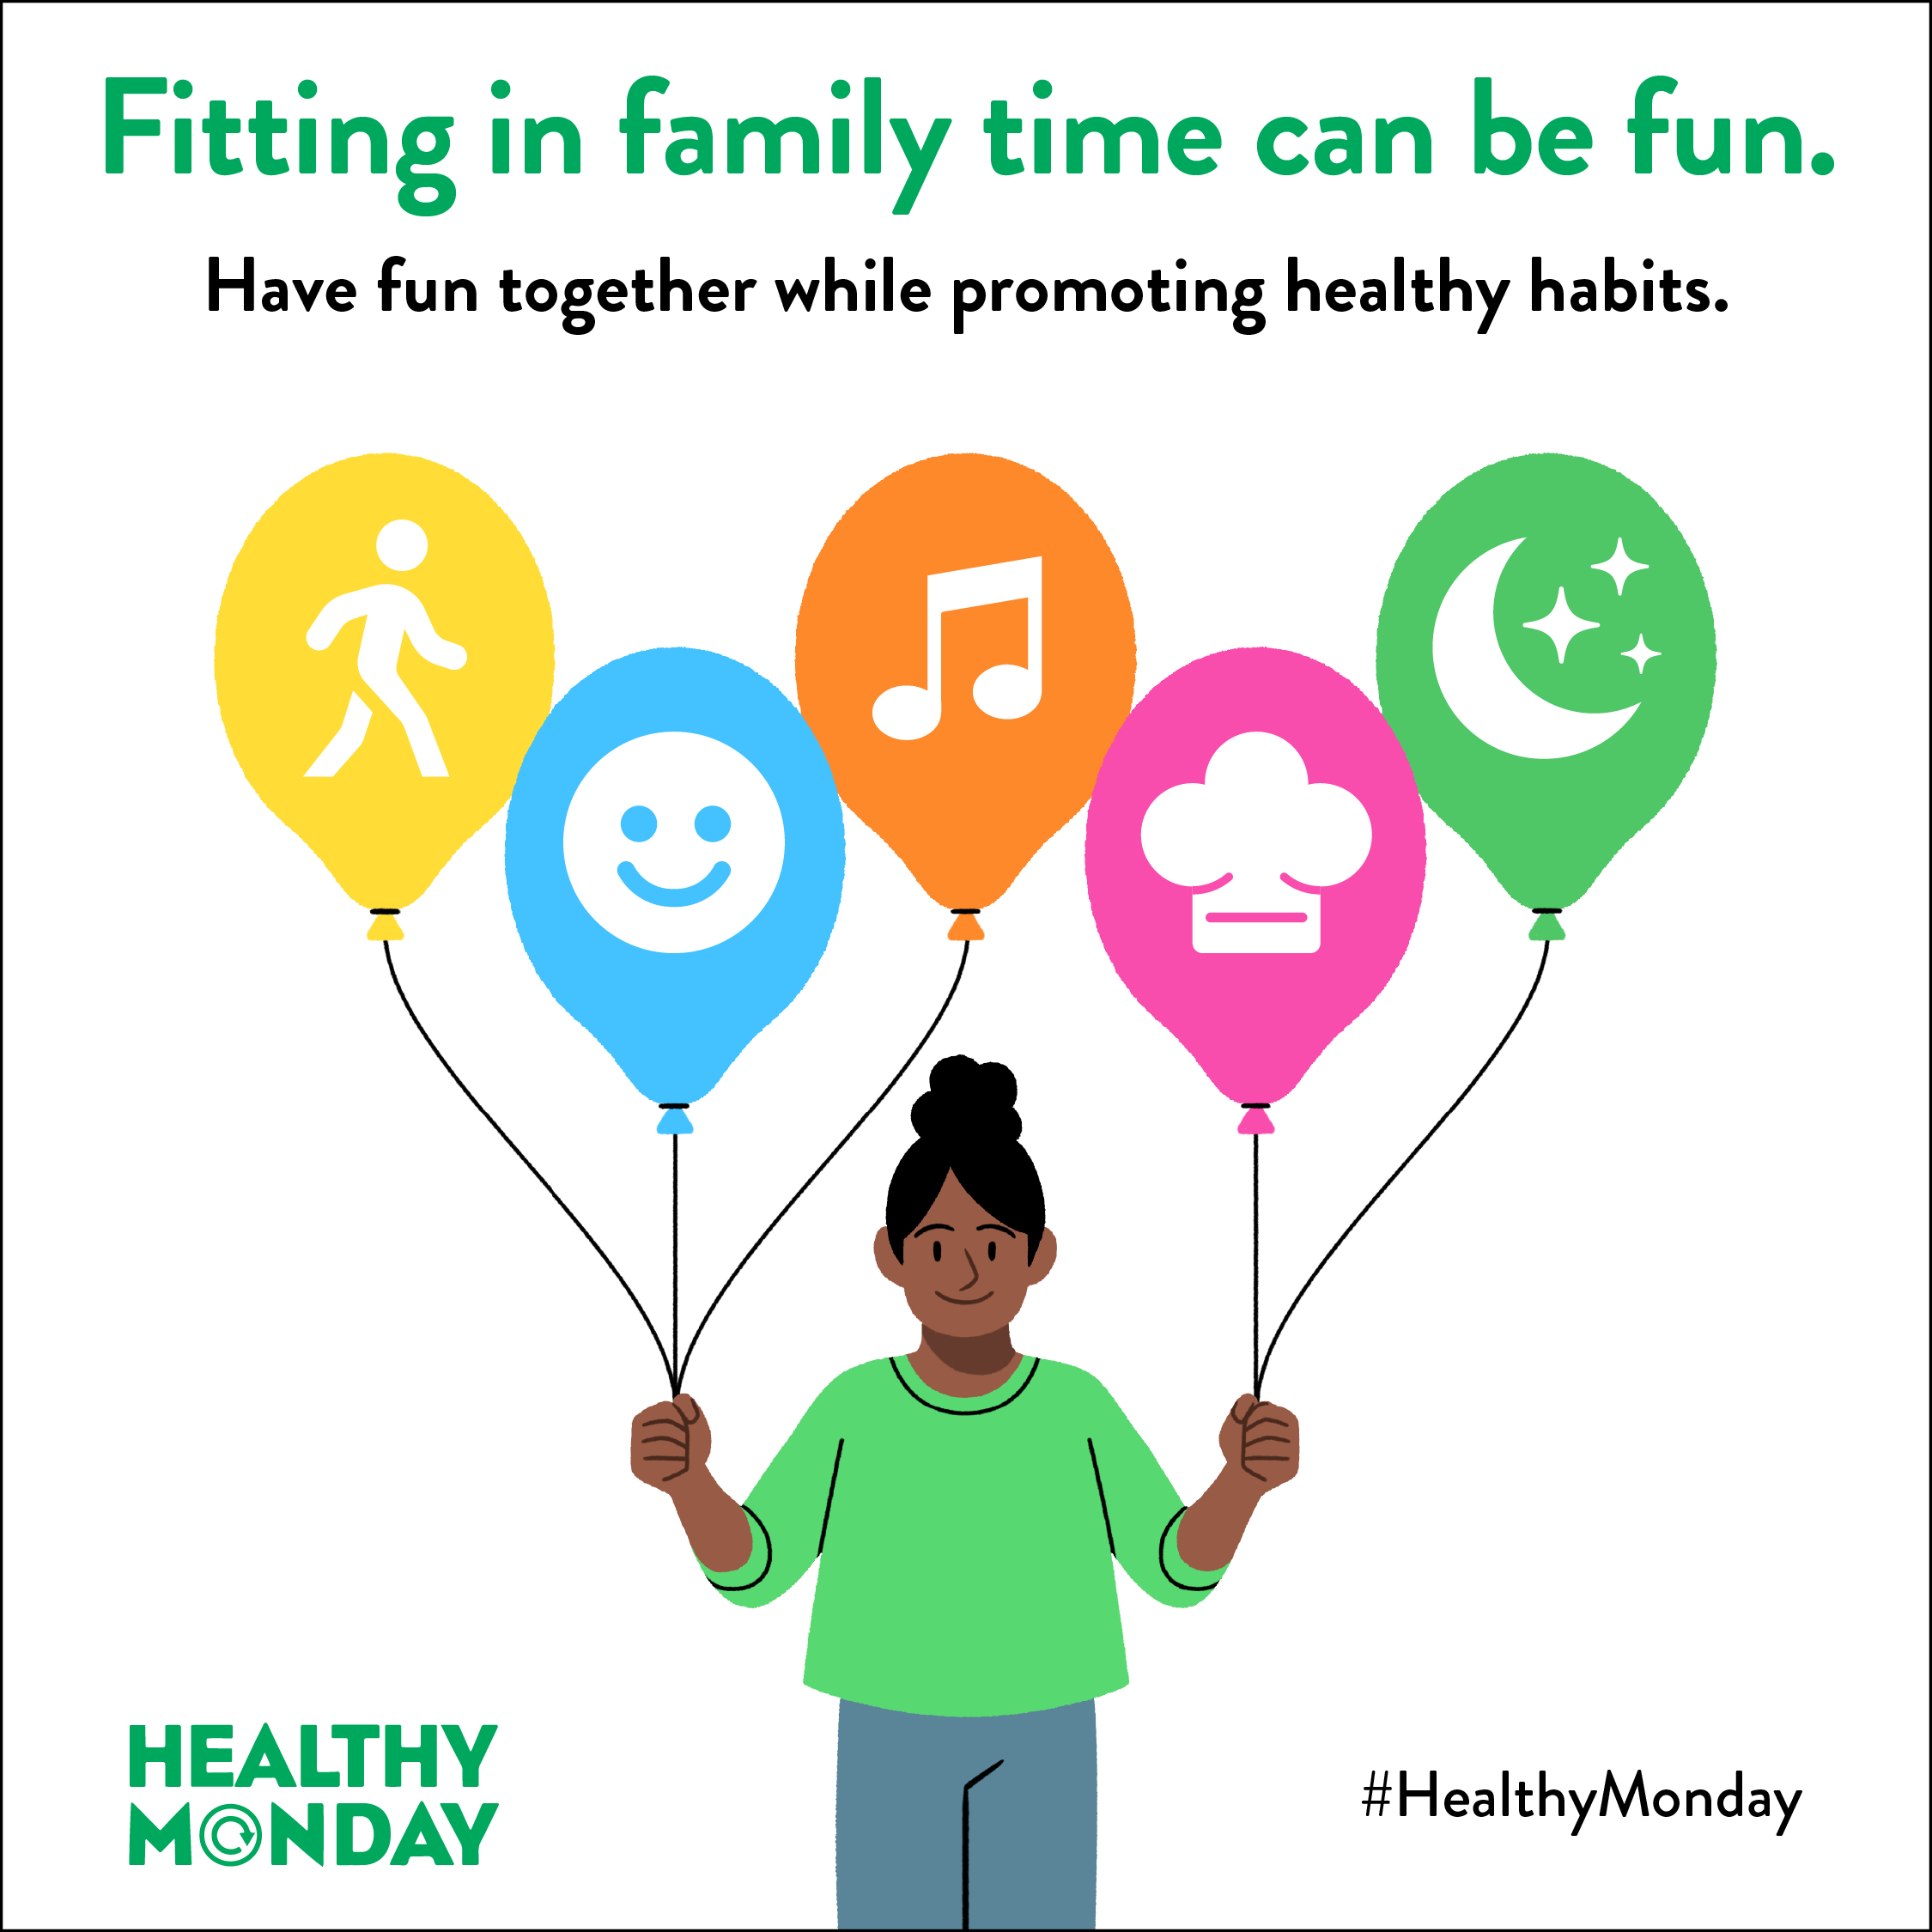 Fitting in family time can be fun. Have fun together while promoting healthy habits.